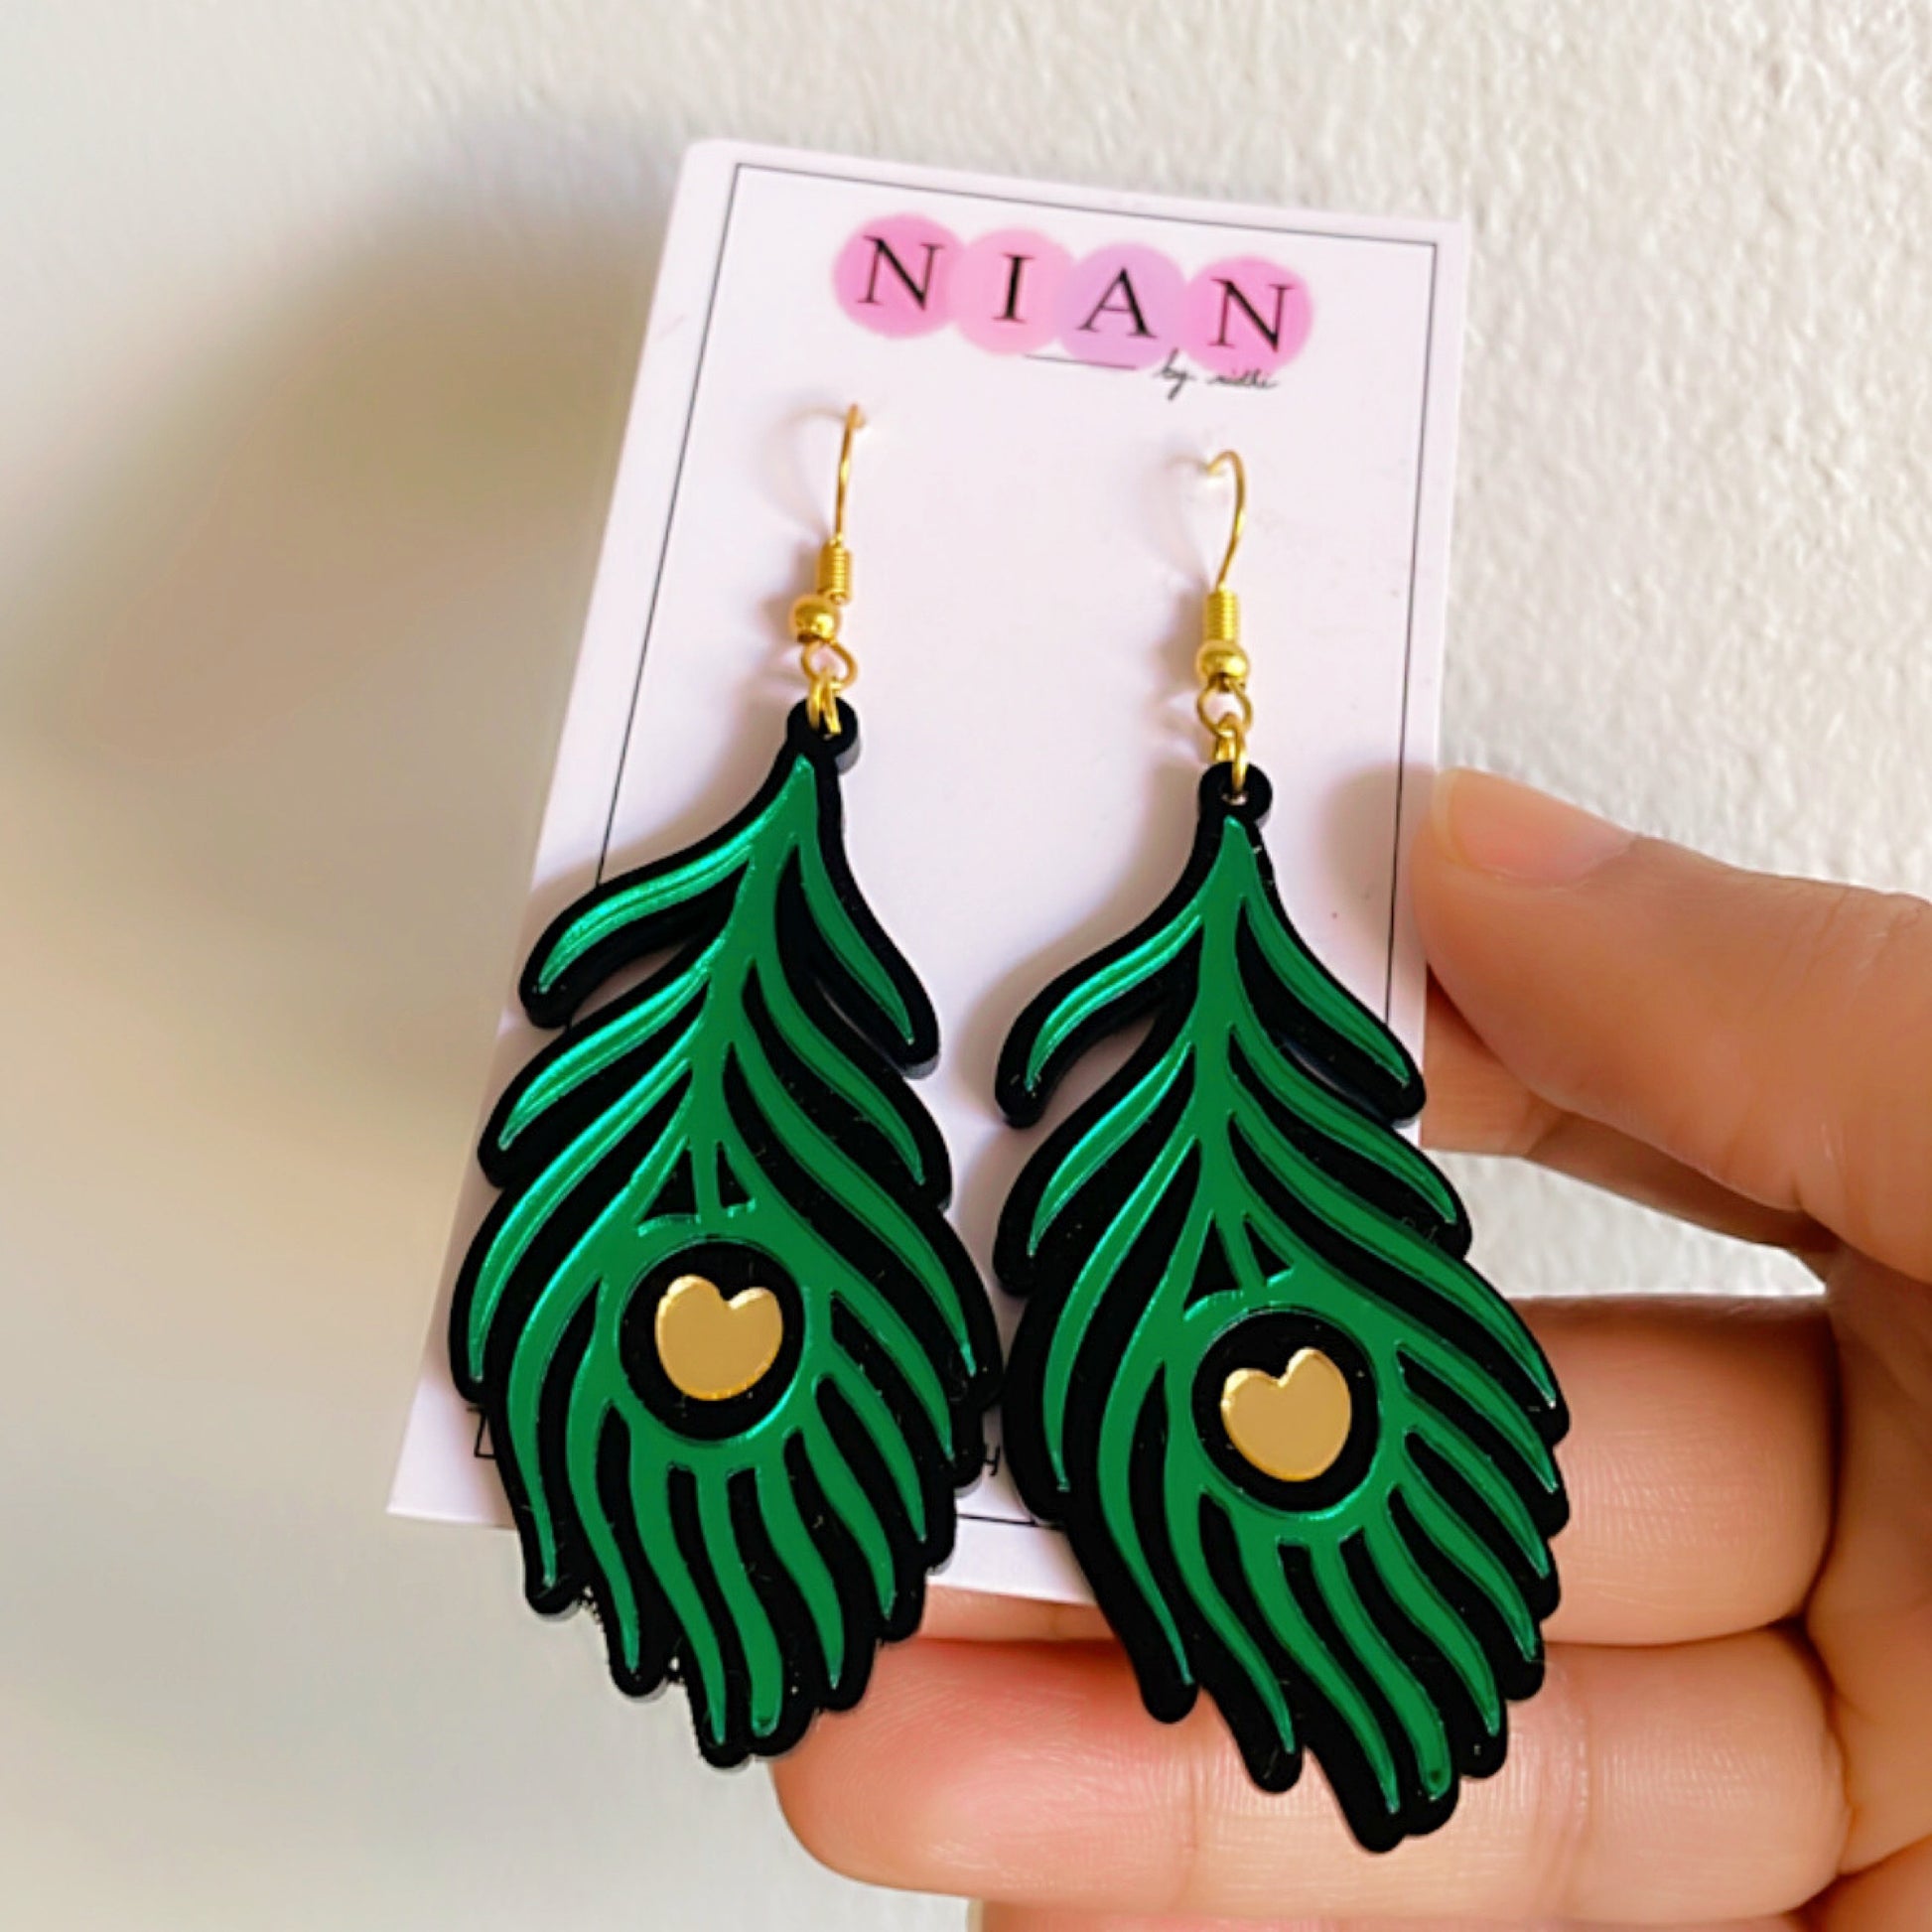 Morpankh Danglers - Glossy Green with Black and Golden details - Nian by Nidhi - placed in a white background and held in a hand